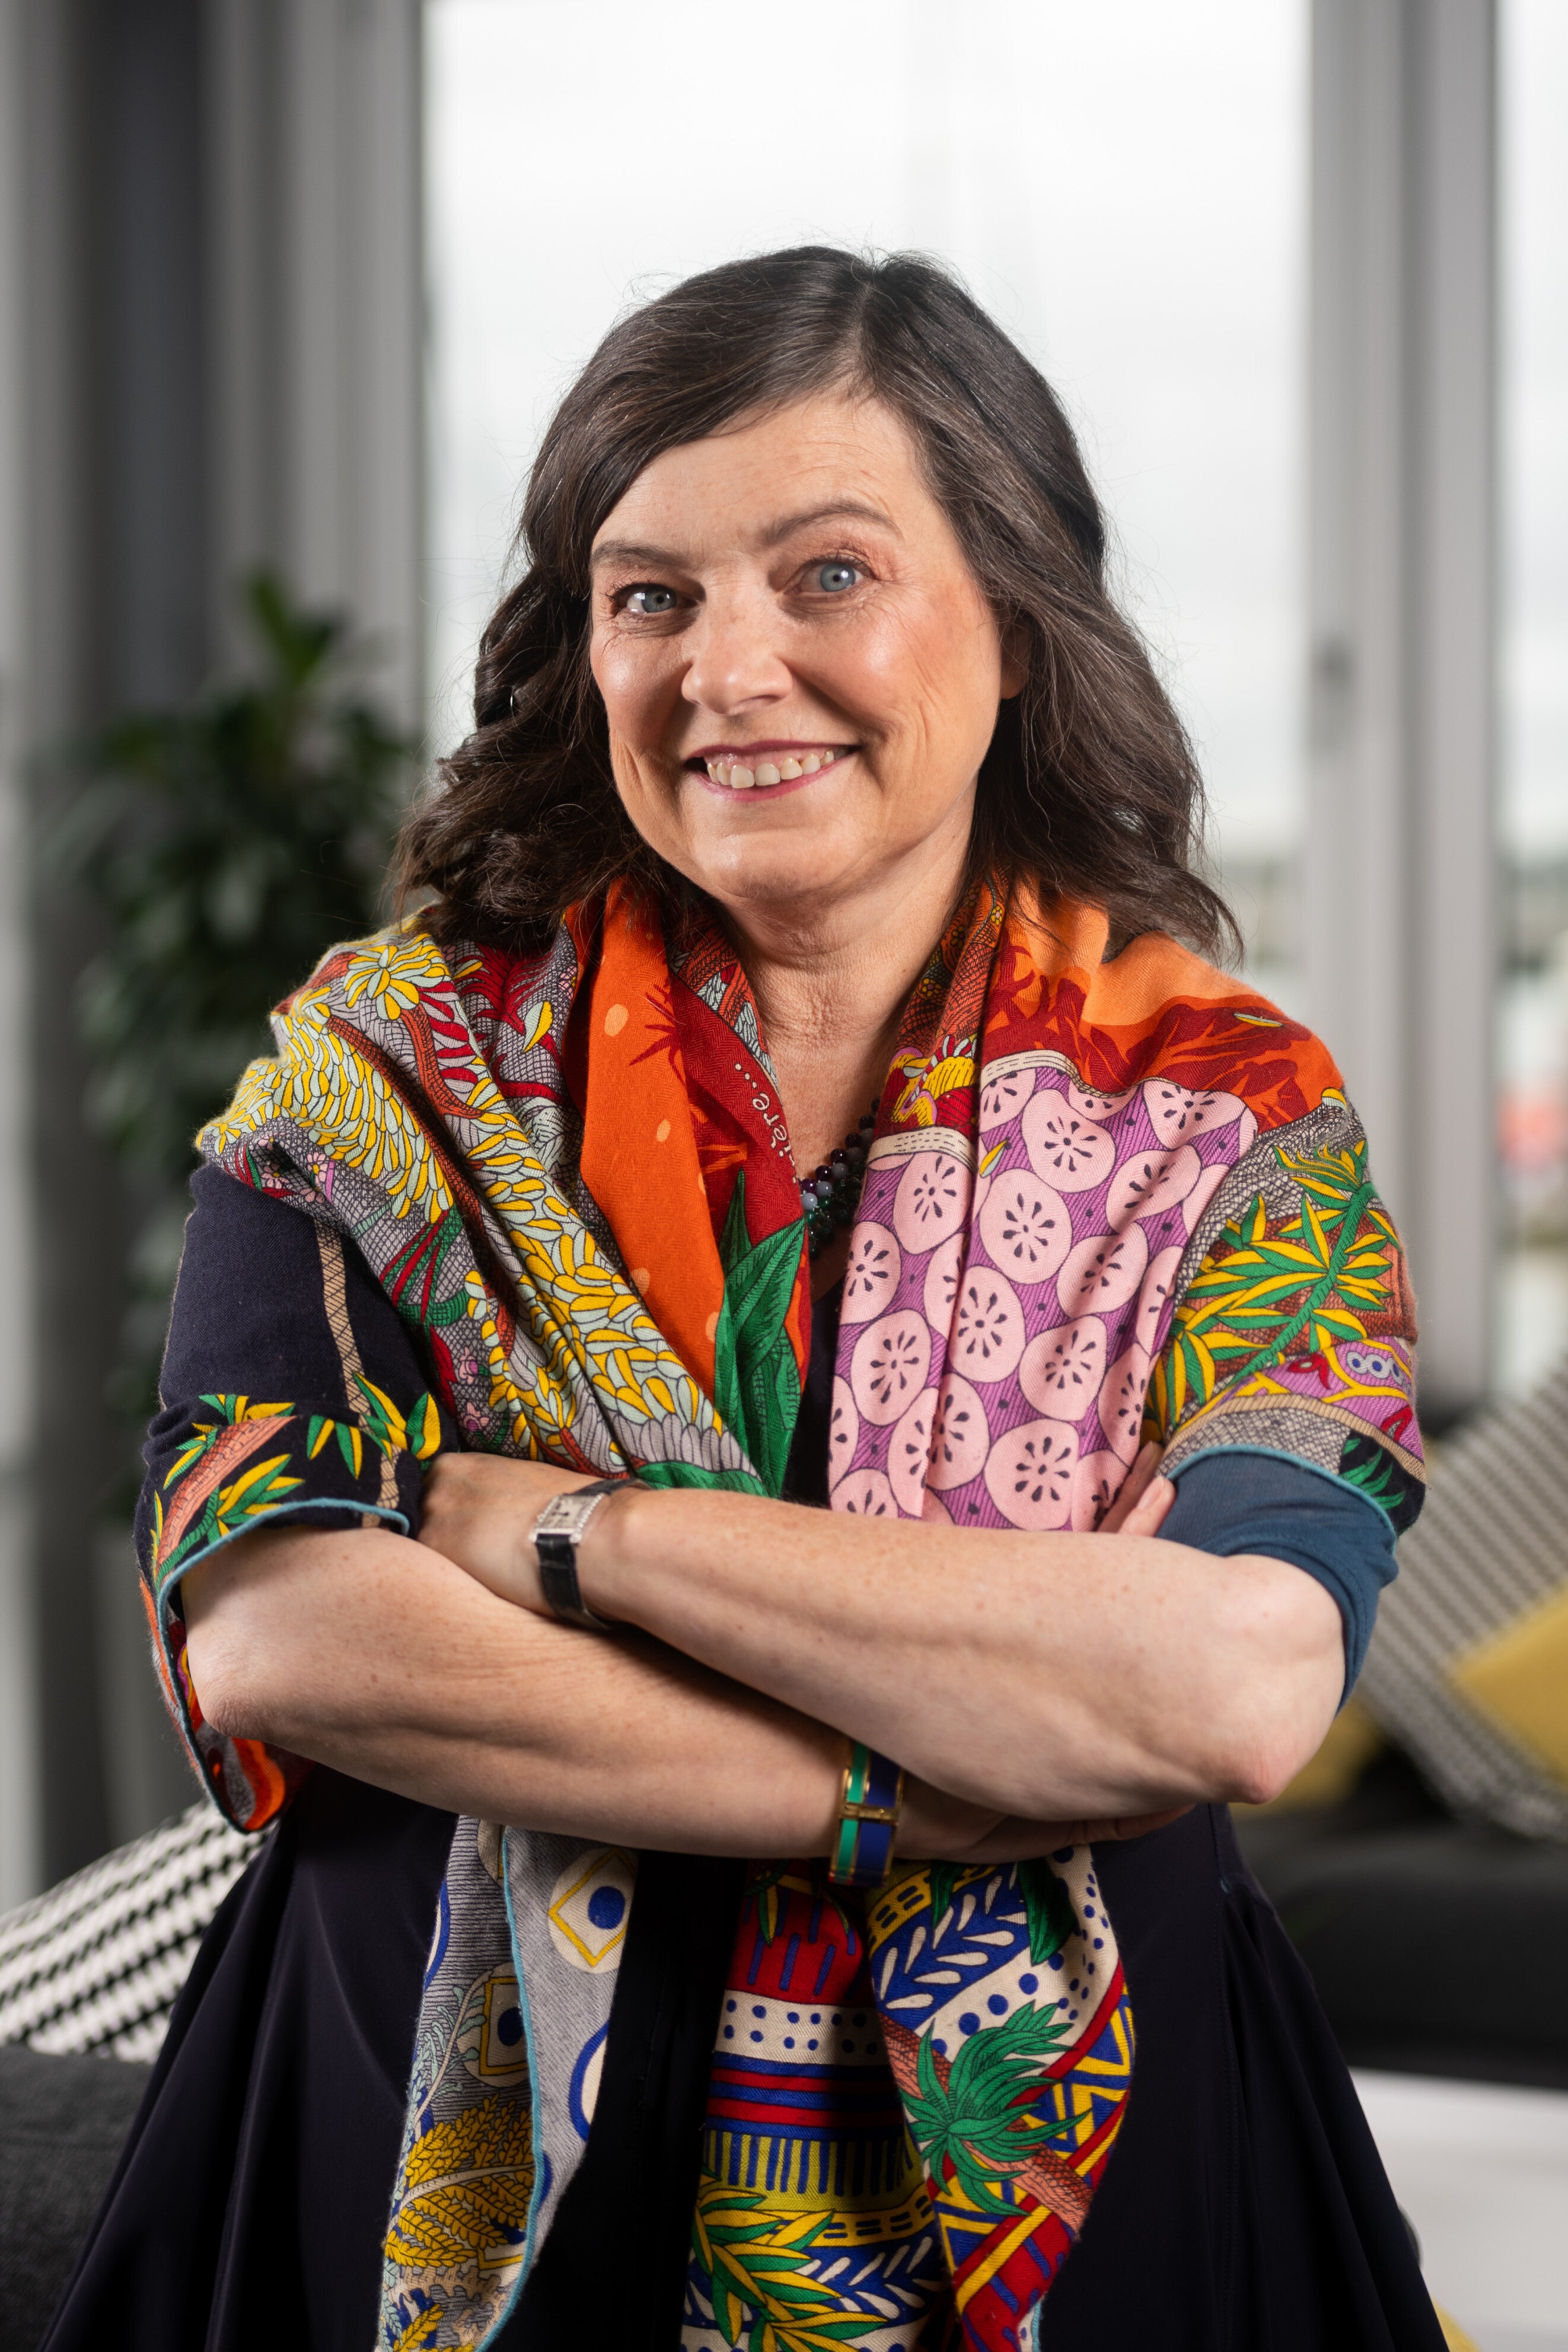 Starling boss Anne Boden founded the bank in 2014 (Starling/PA)